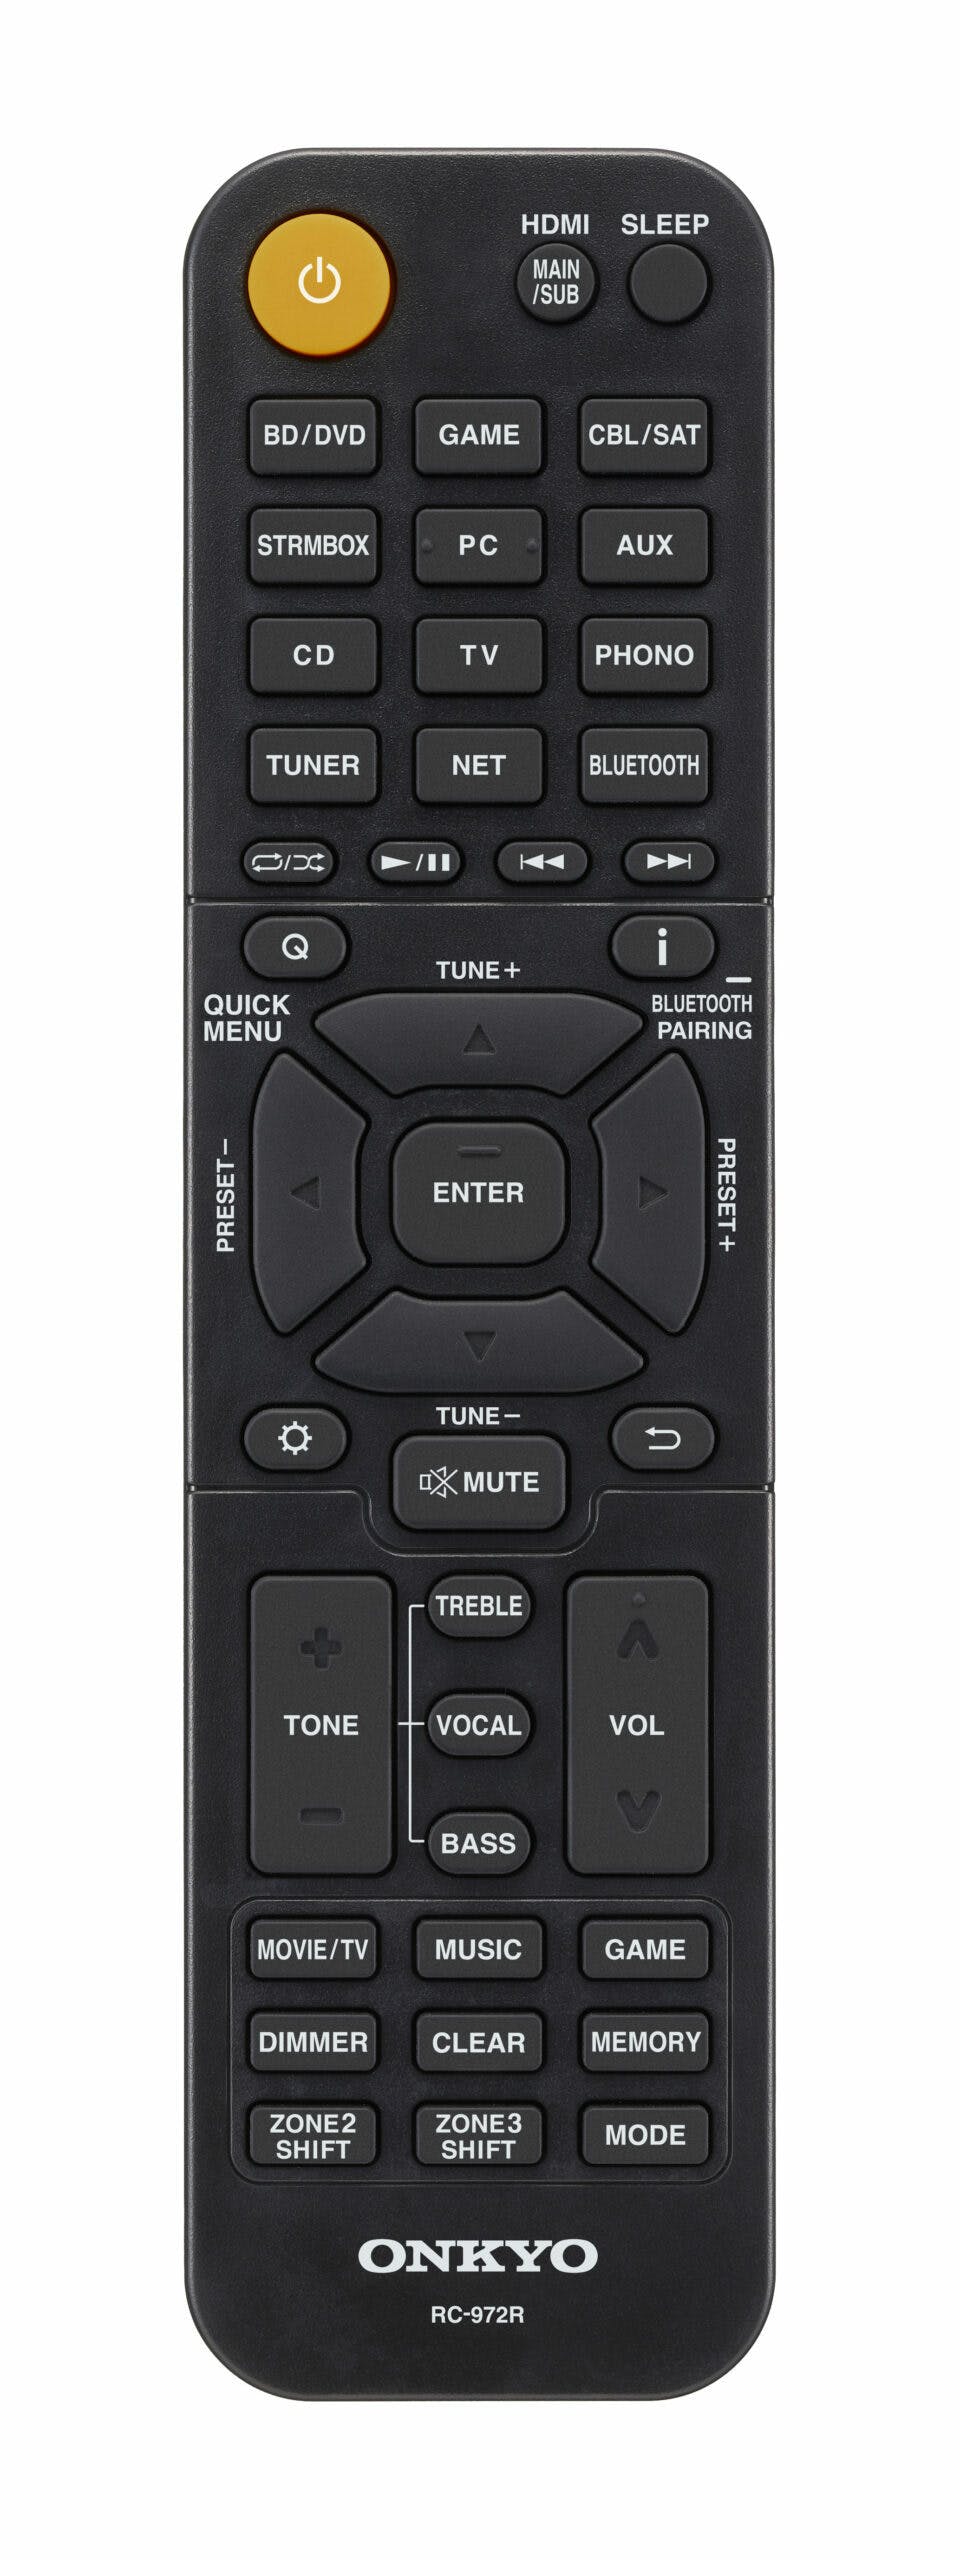 ONKYO RC972 Remote Control Front View